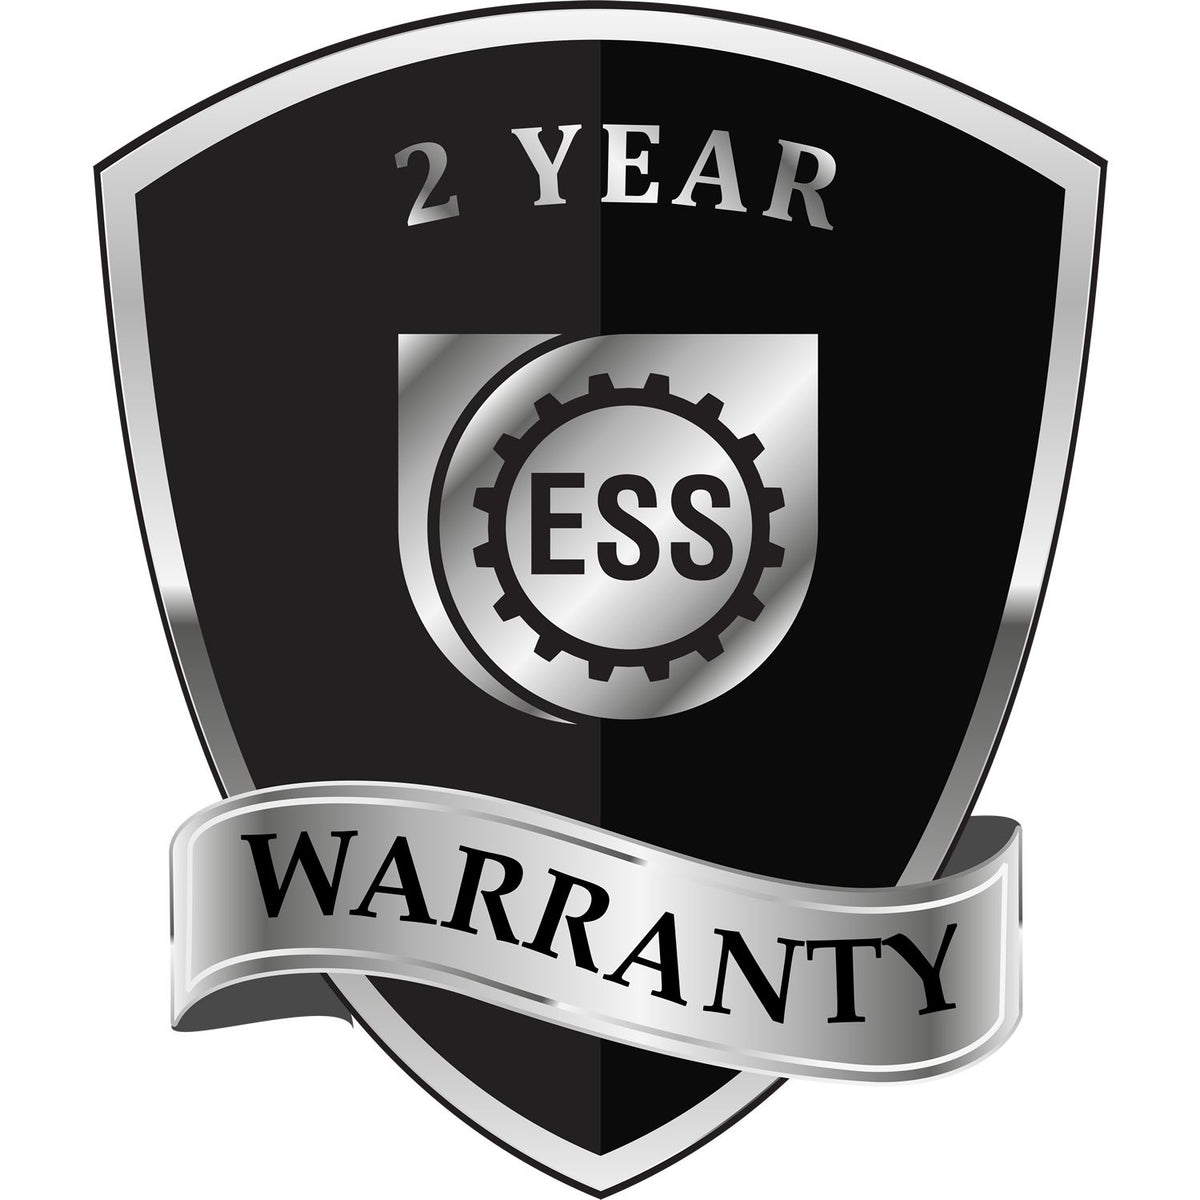 A black and silver badge or emblem showing warranty information for the Iowa Geologist Desk Seal